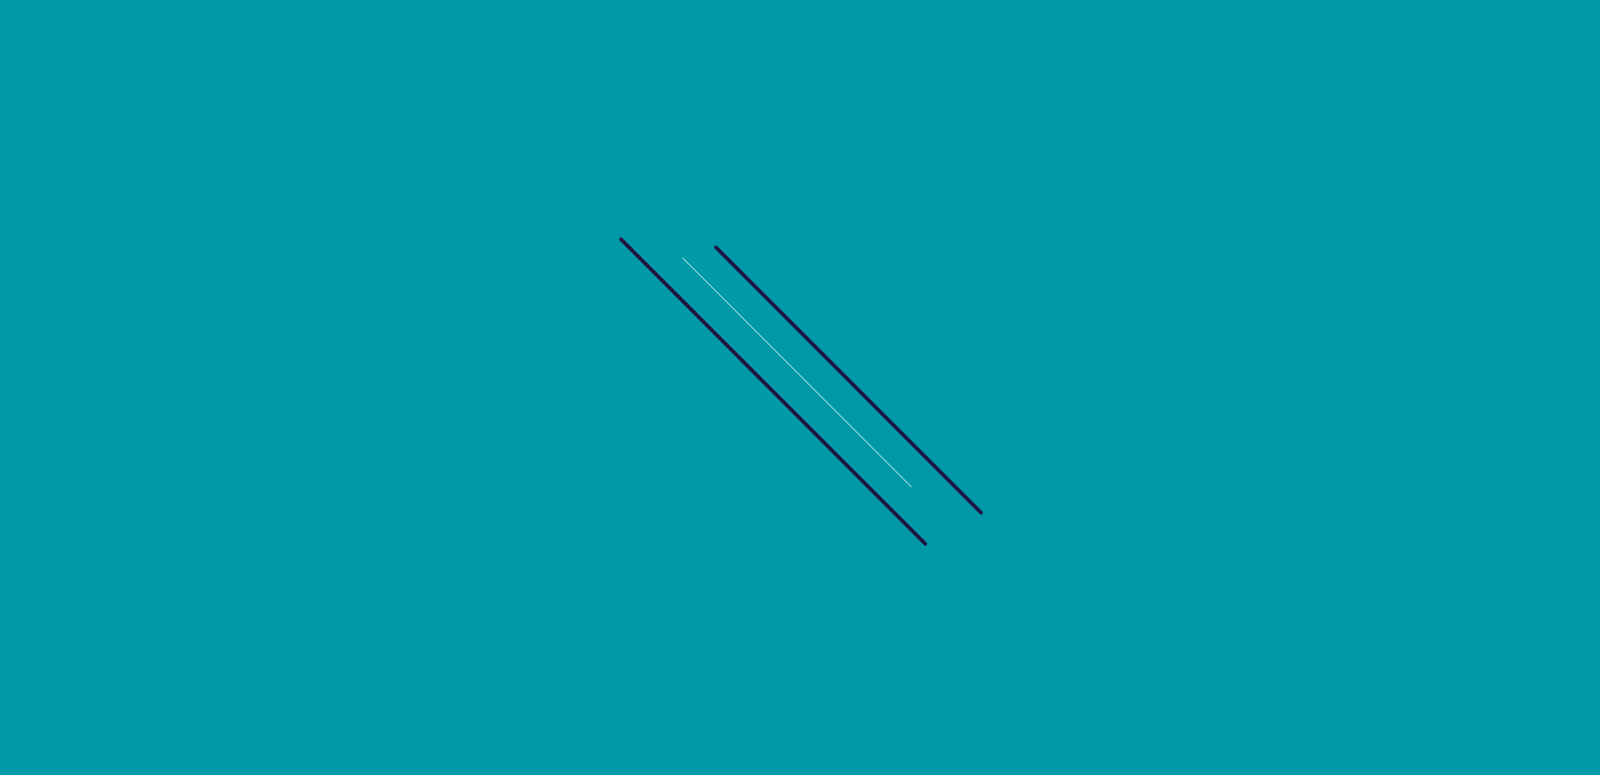 Graphic with three diagonal lines against a teal background.